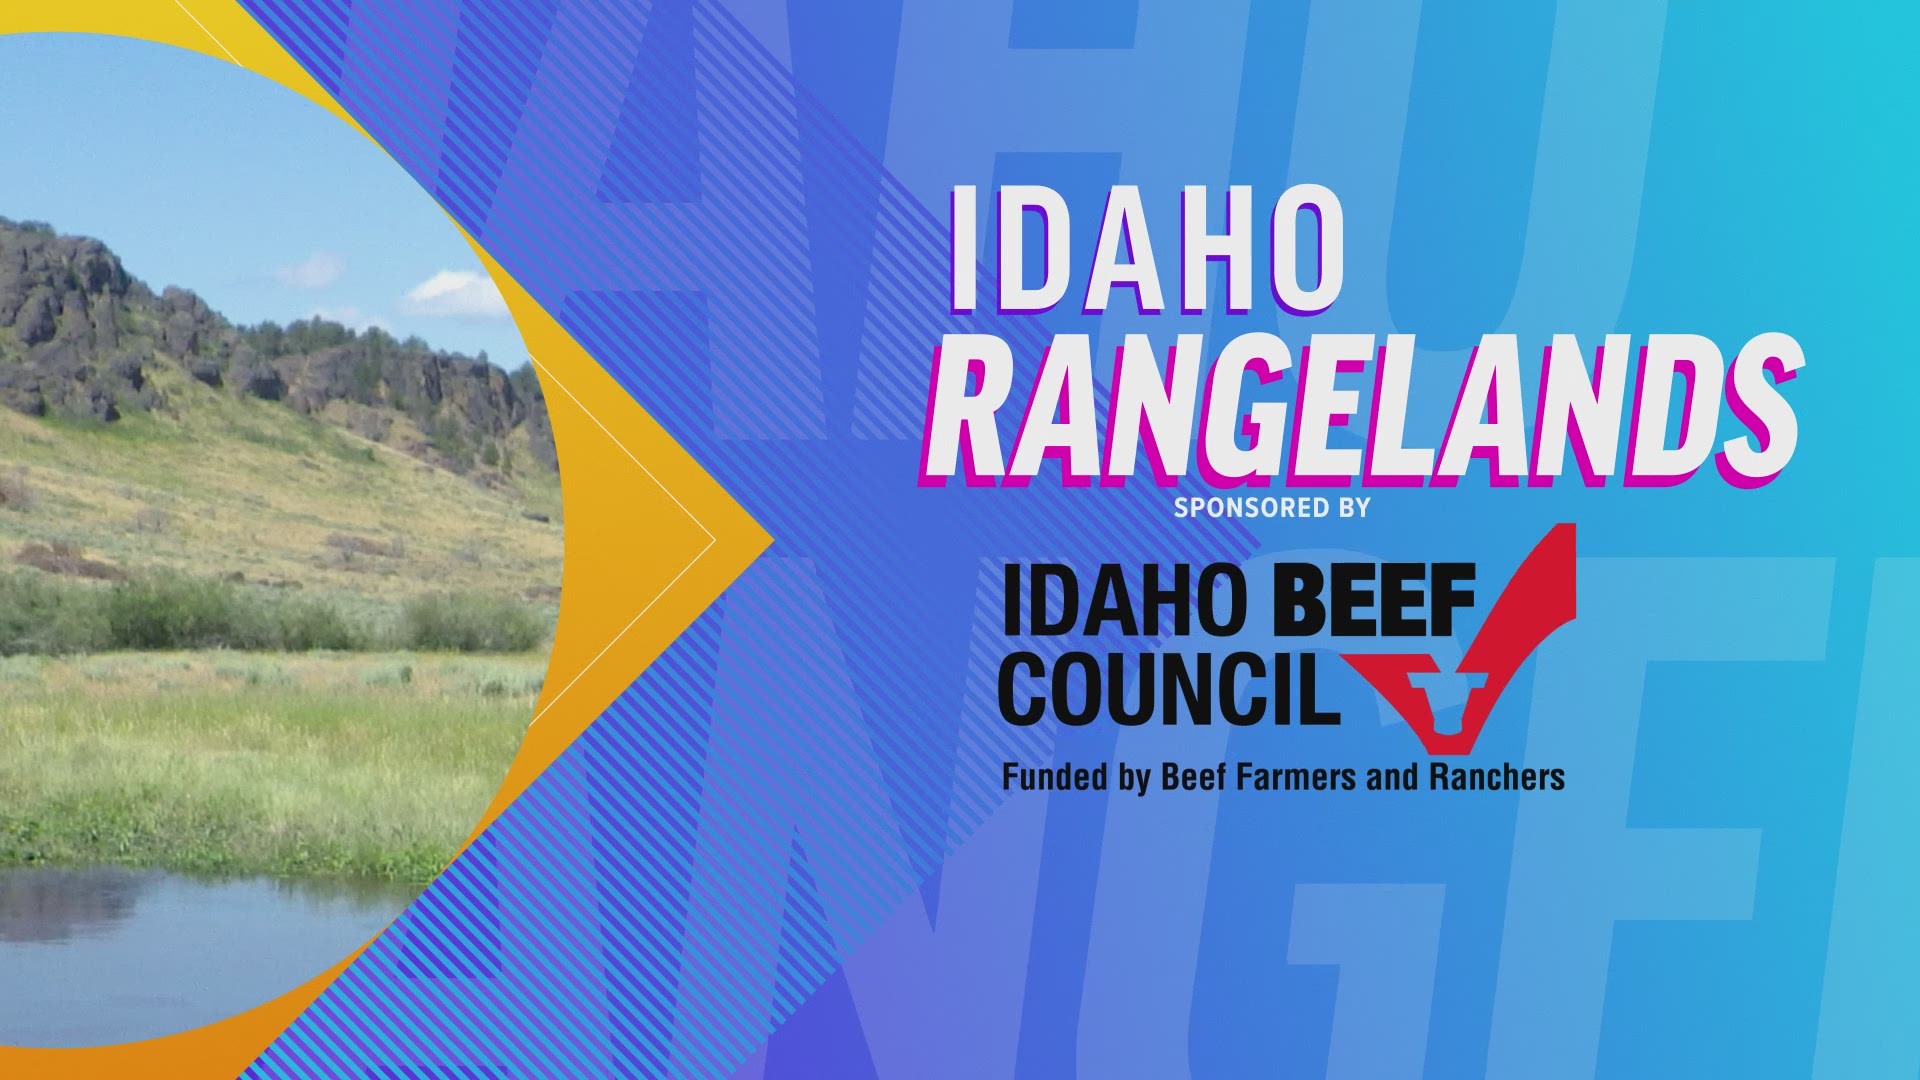 Sponsored by the the Idaho Beef Council